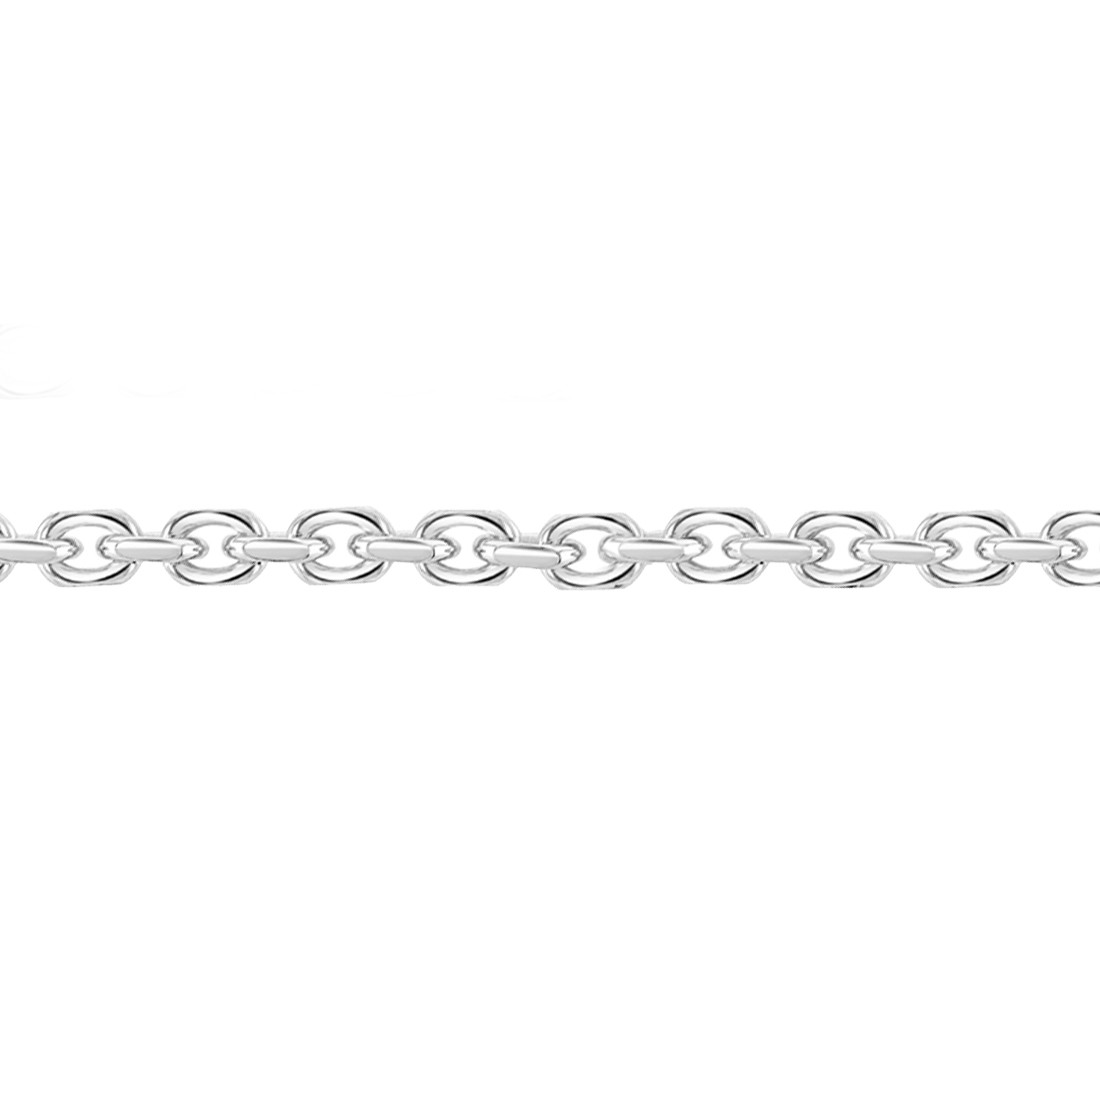 Buy or send Floral Design and Beaded Chain Bracelet Type 70 Pure Silver  Rakhi  74 Grams Online